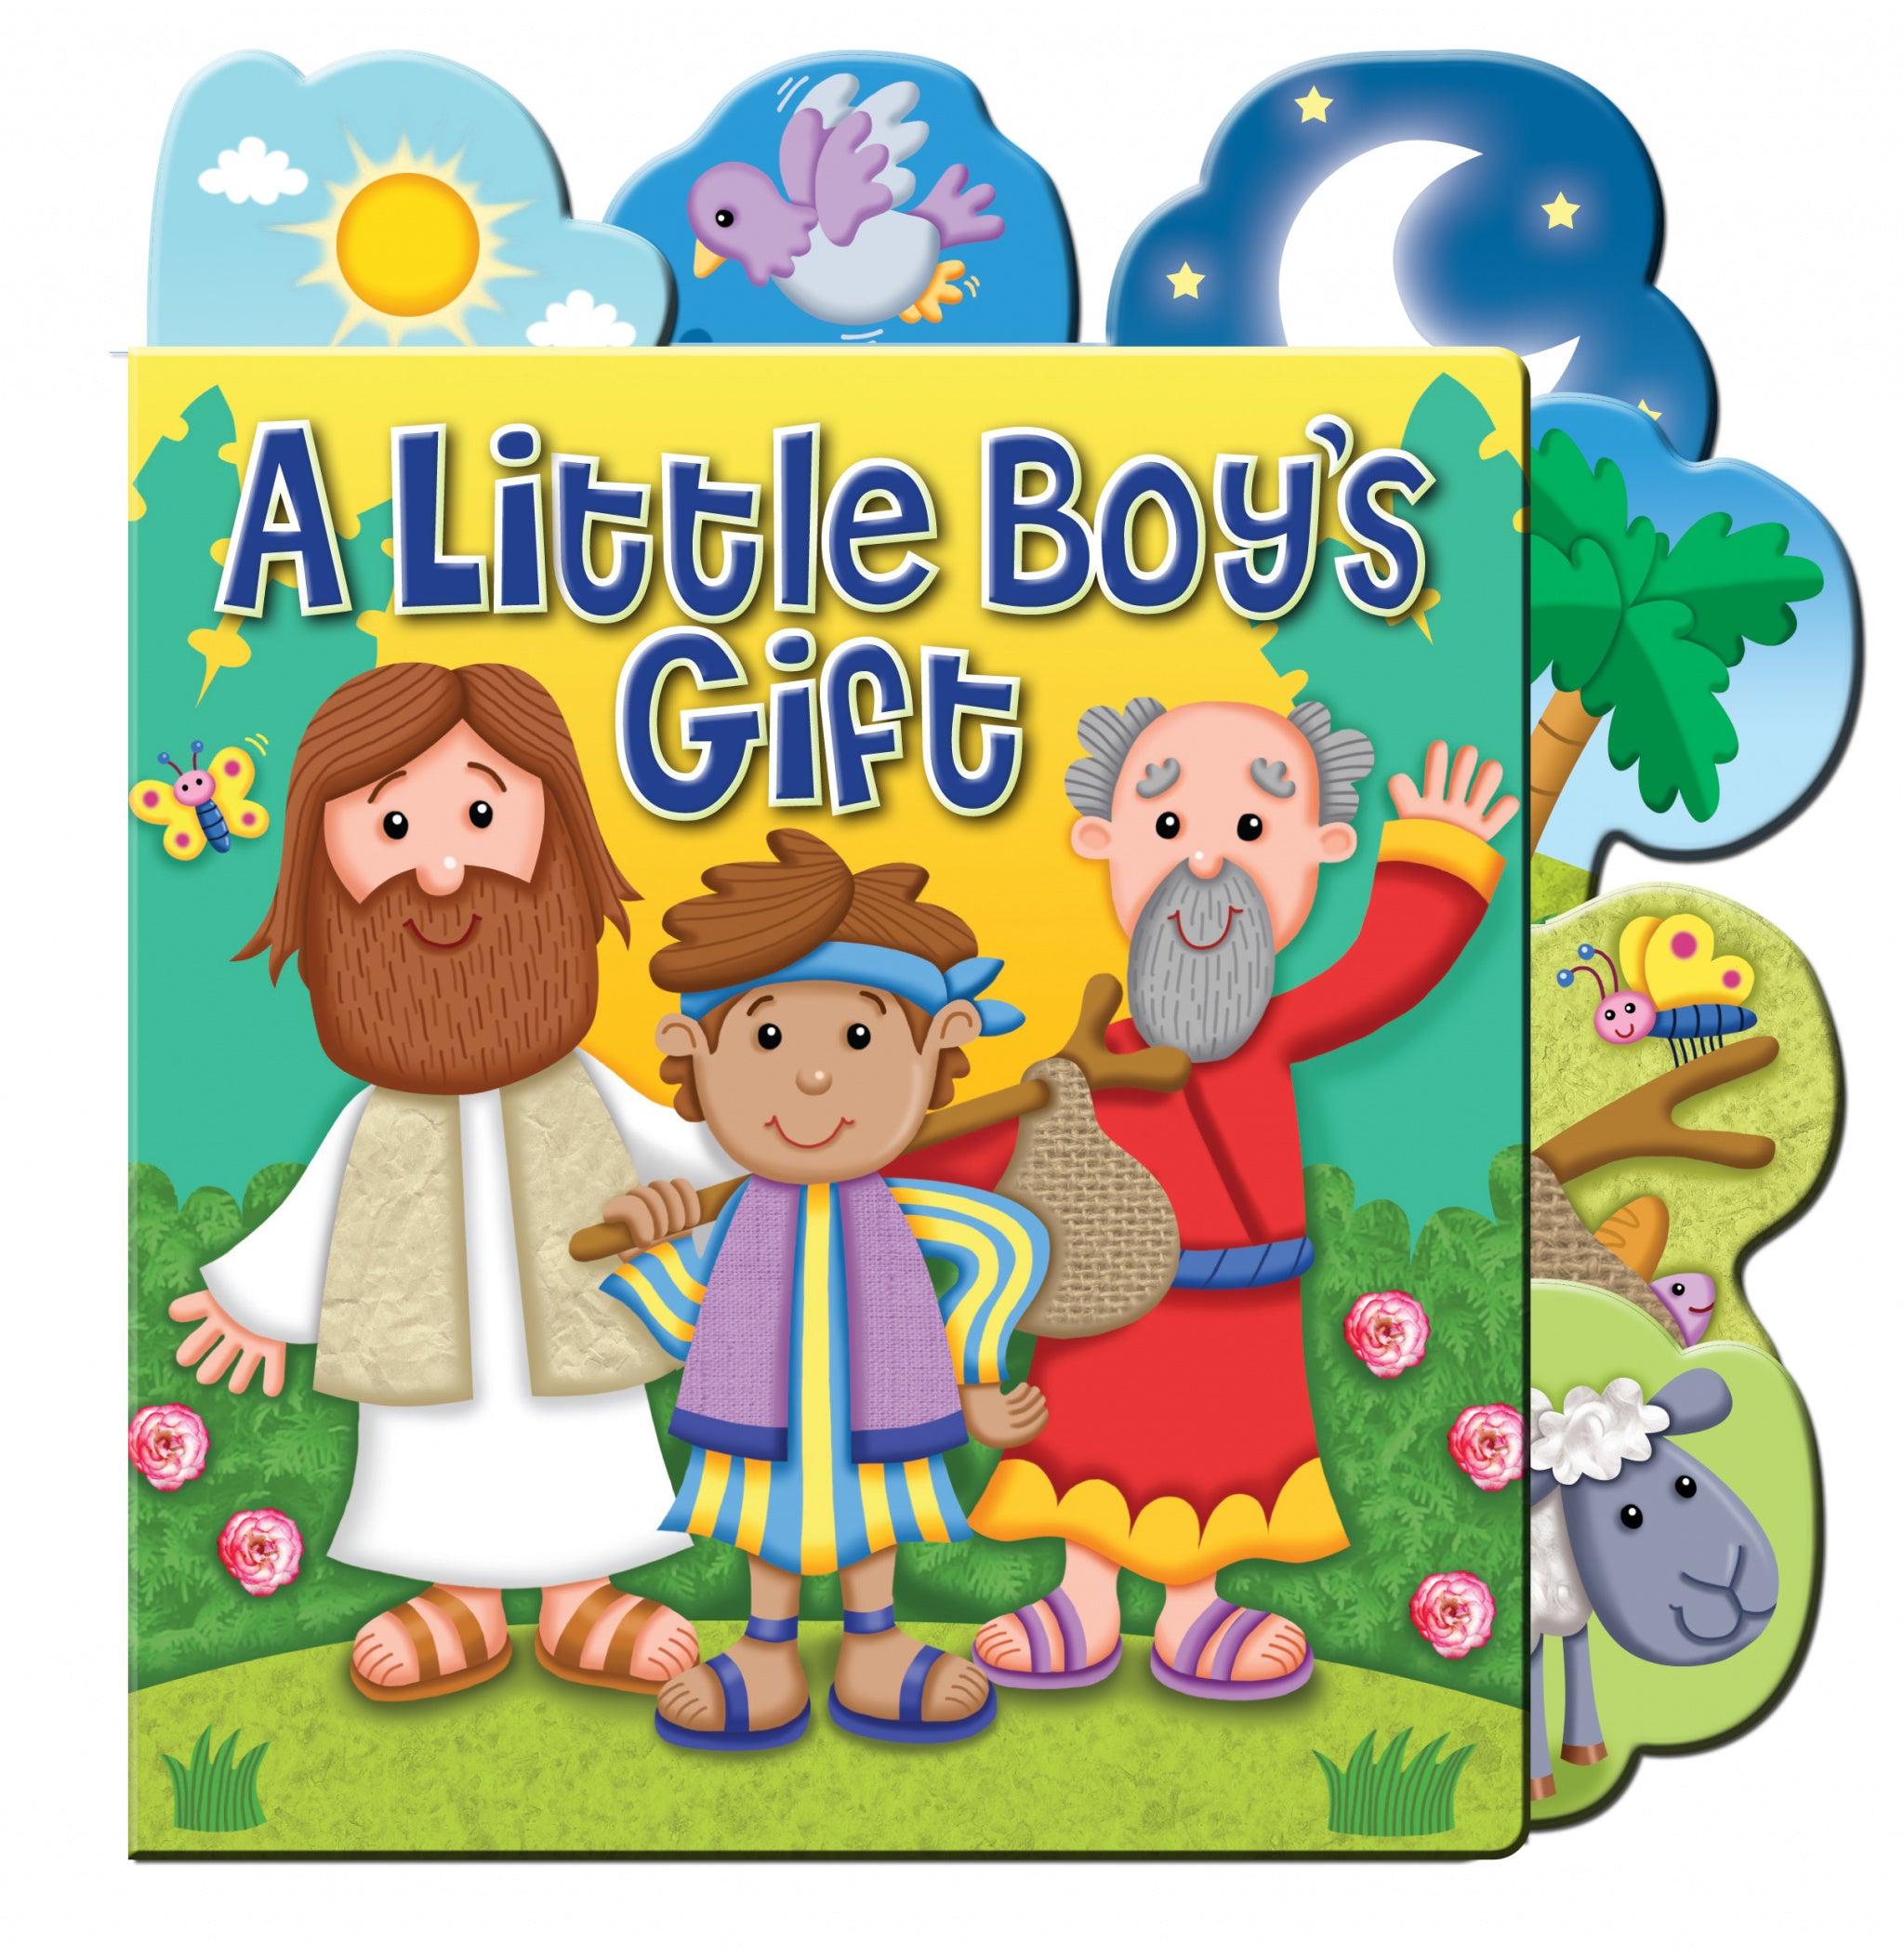 Image of A Little Boy's Gift other